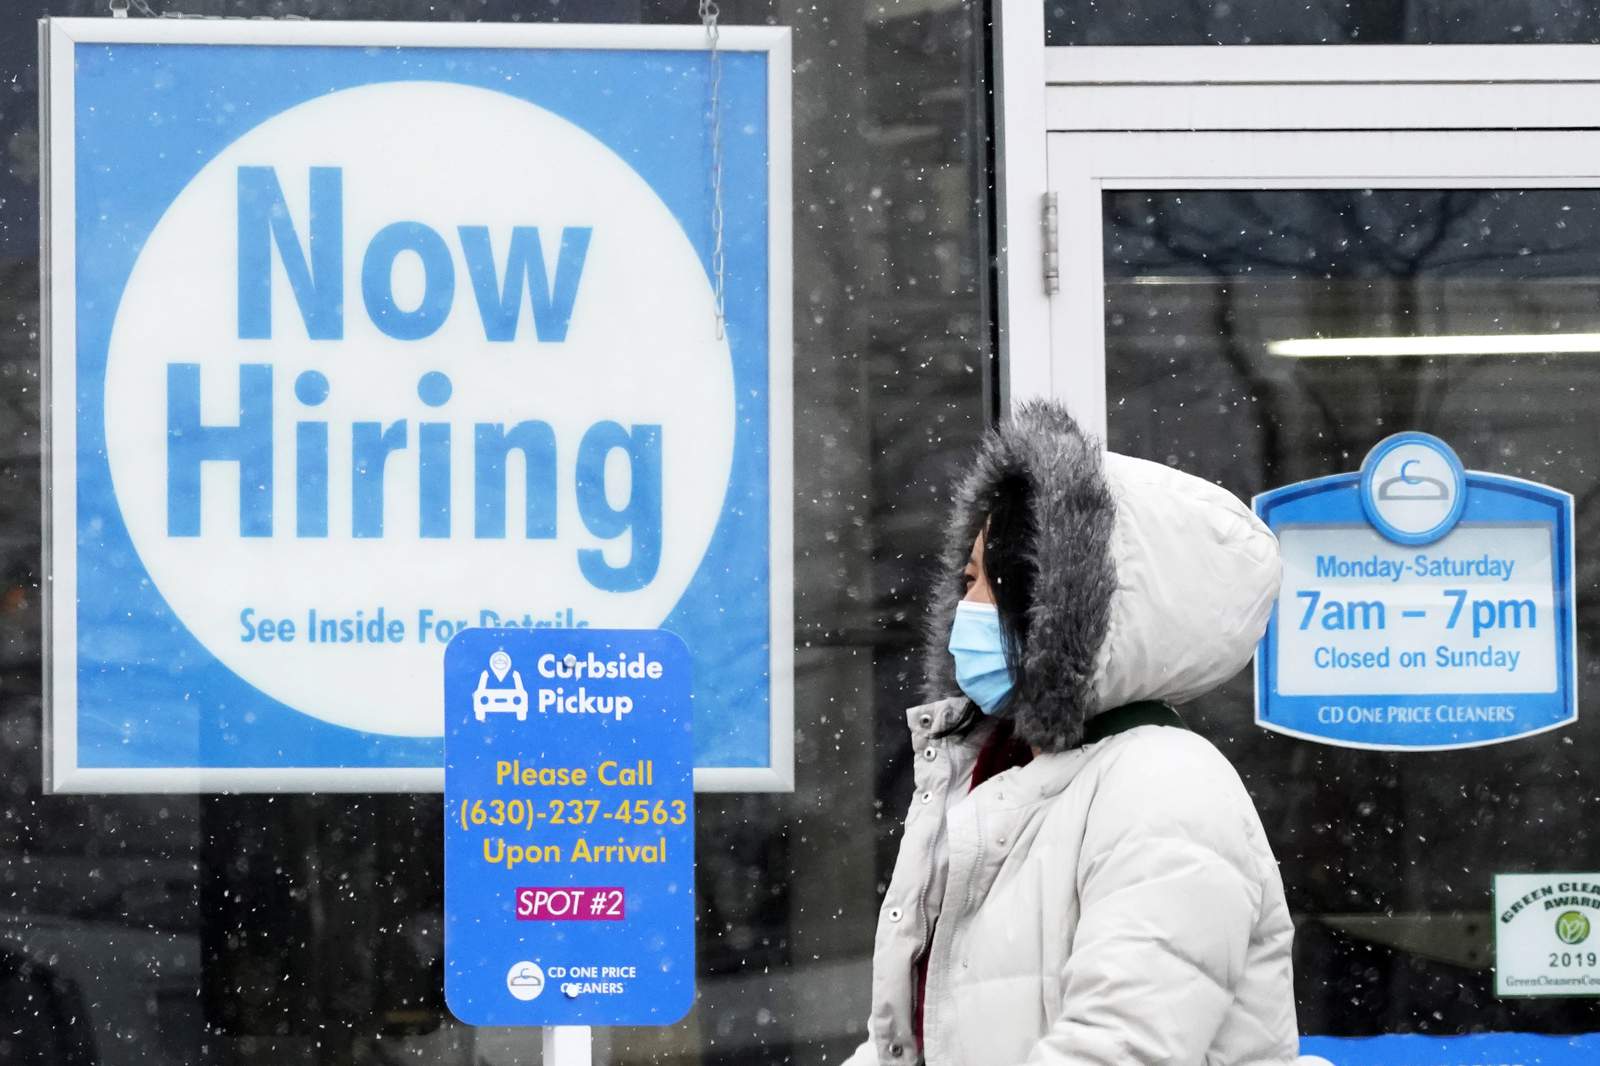 Jump in hiring fuels optimism for US economic recovery